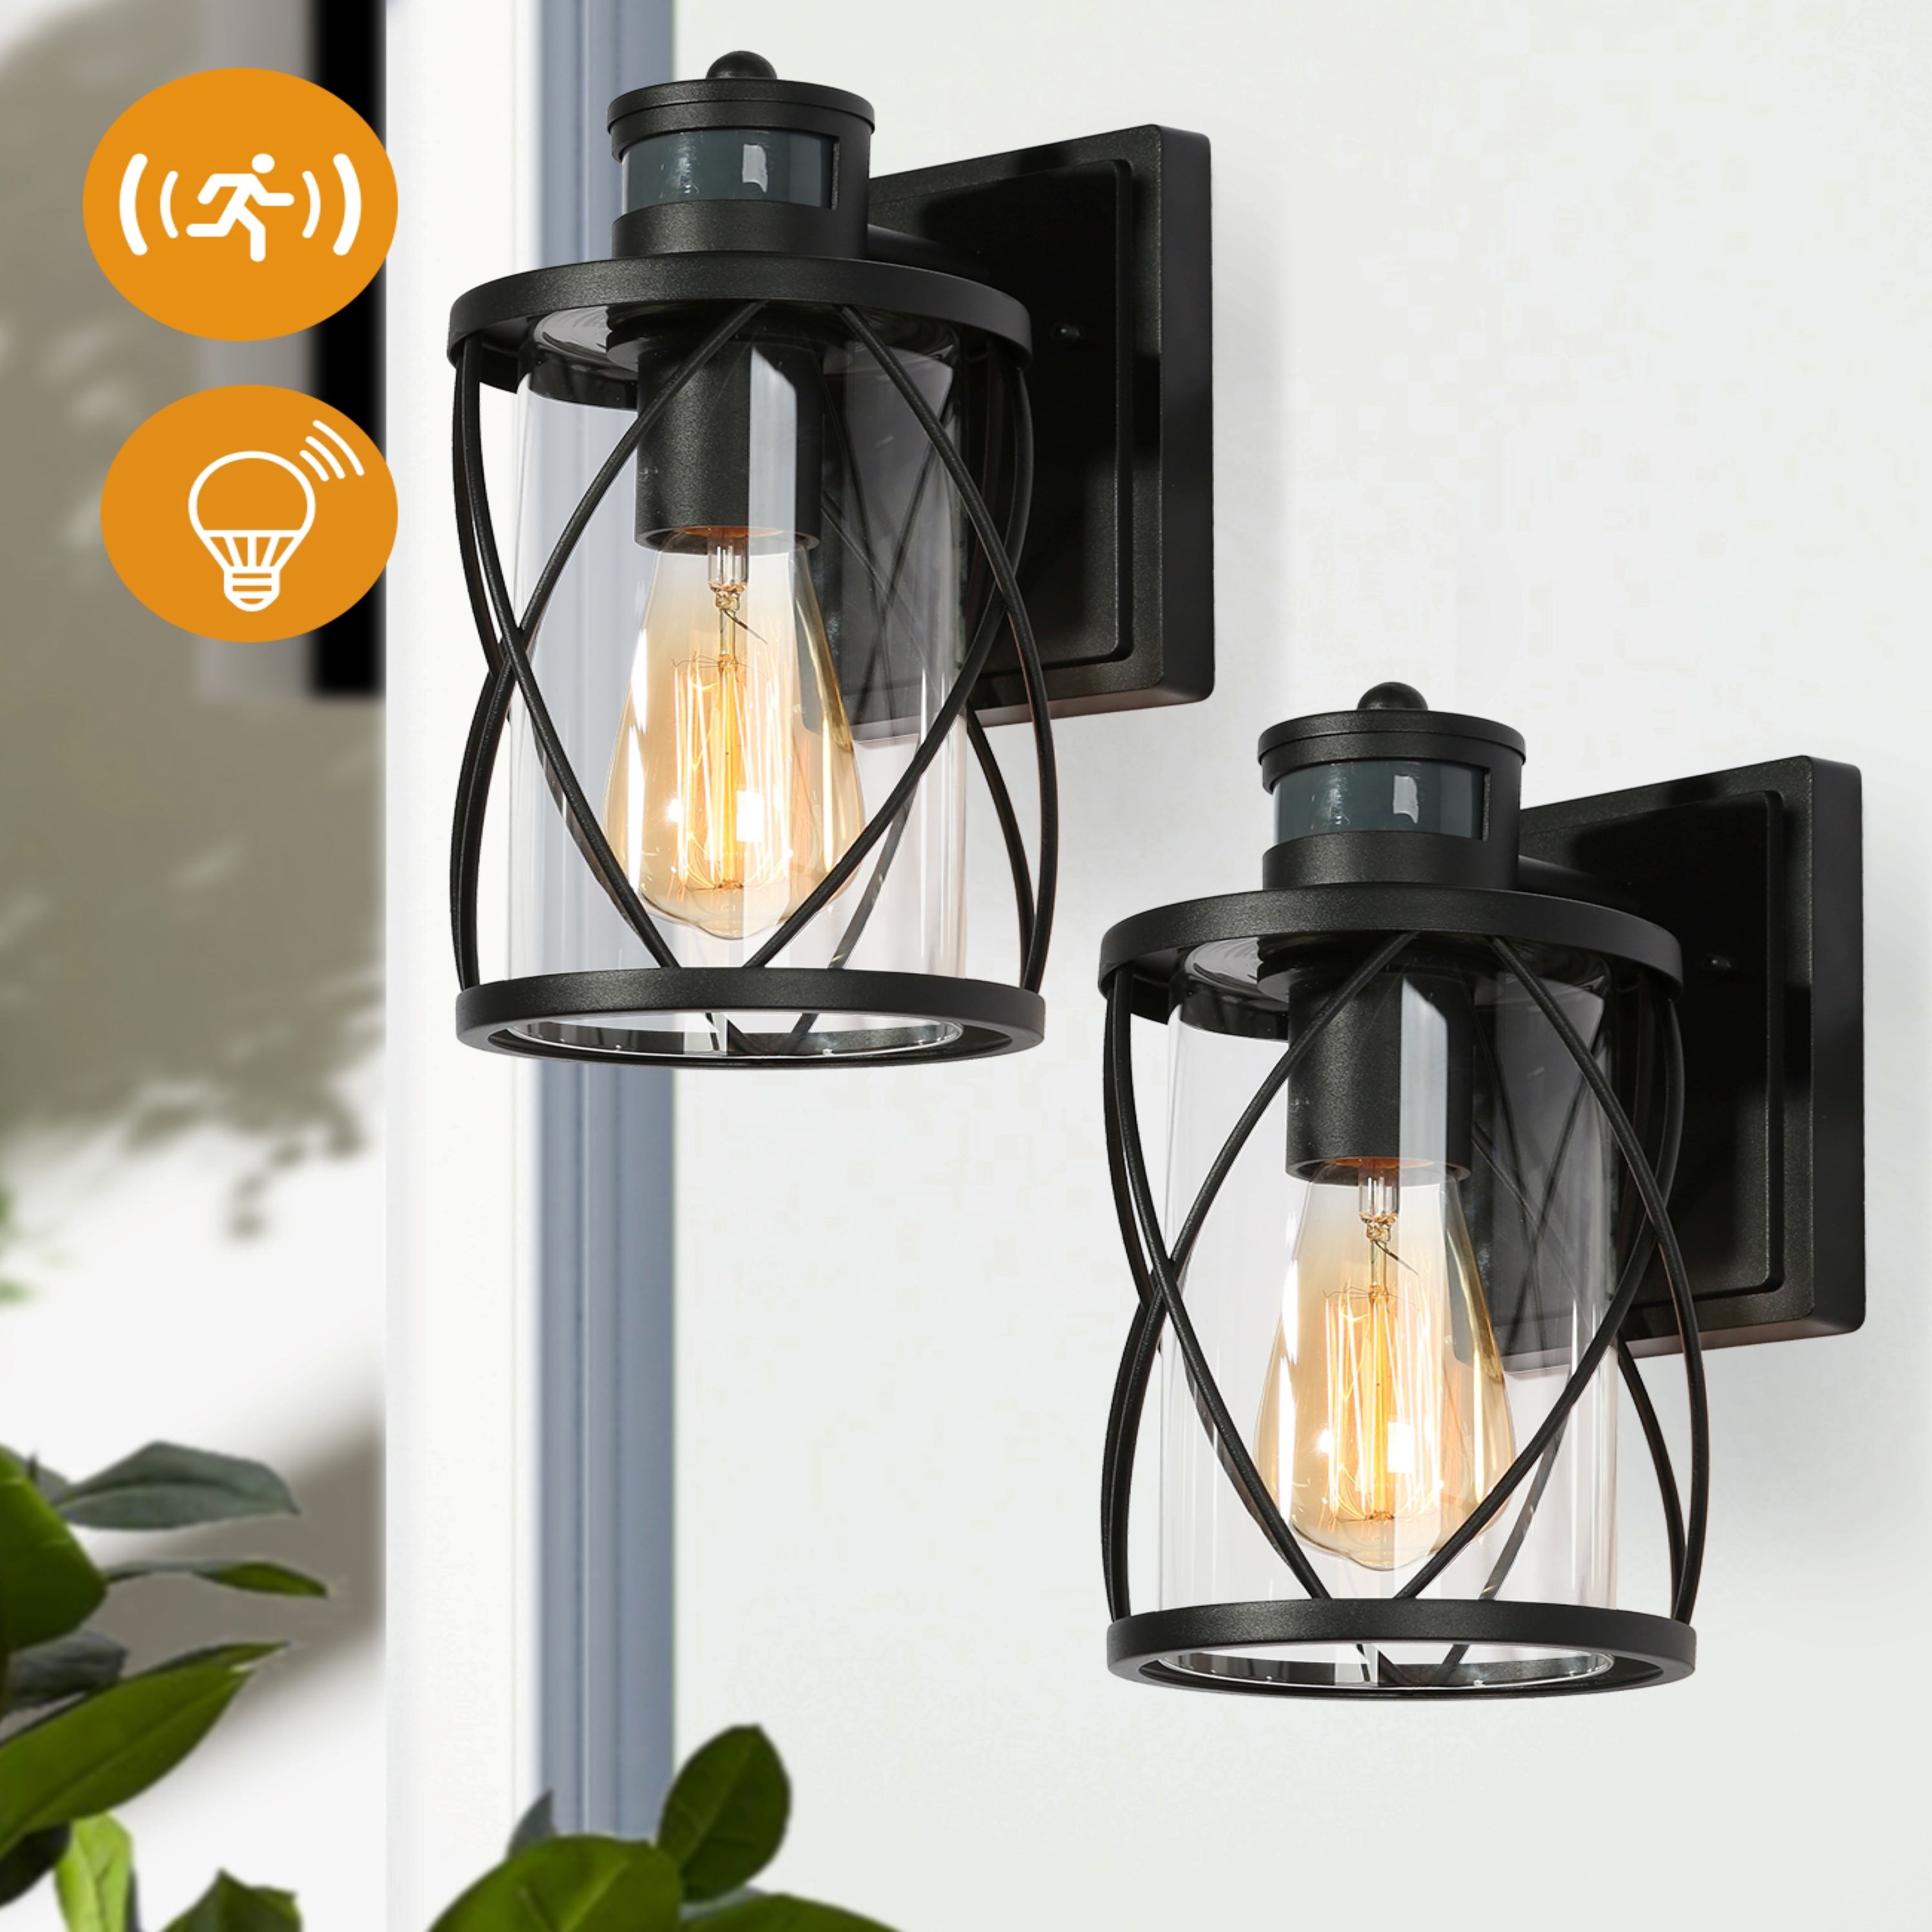 https://ak1.ostkcdn.com/images/products/is/images/direct/c3feced573f2ddbfc7b32d0c6e182c6d601b9db0/2-pack-Waterproof-Outdoor-Multi-mode-Motion-Sensor-Lights-Dusk-to-Dawn-Wall-Lantern.jpg